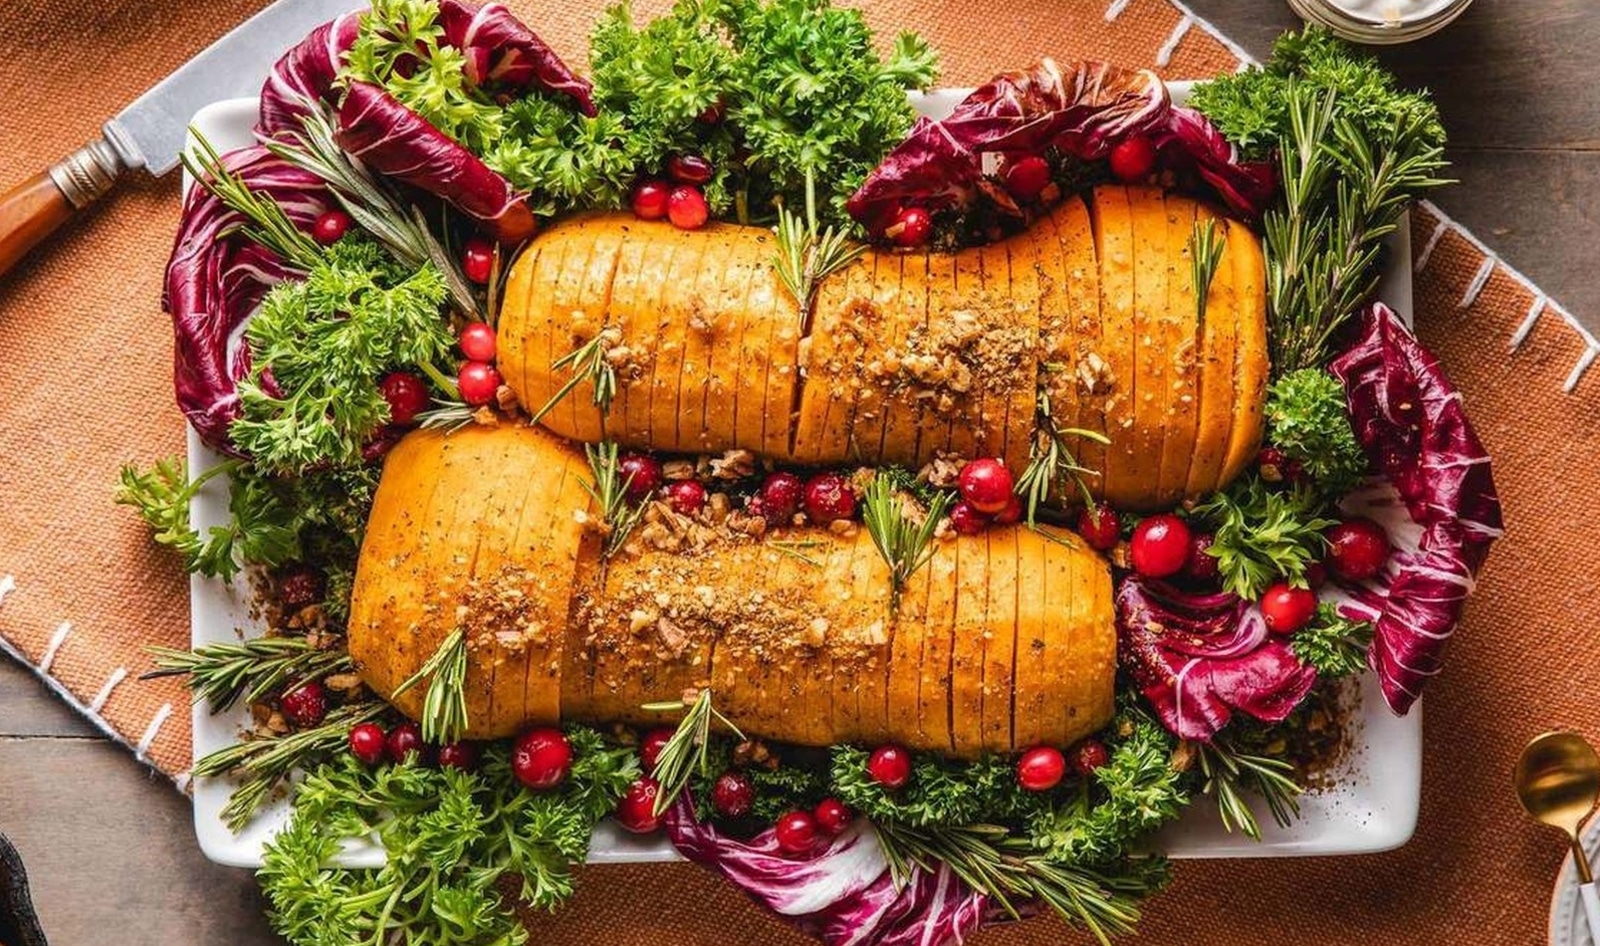 Take the Stress Out of Thanksgiving With These Vegan Meal Delivery Services